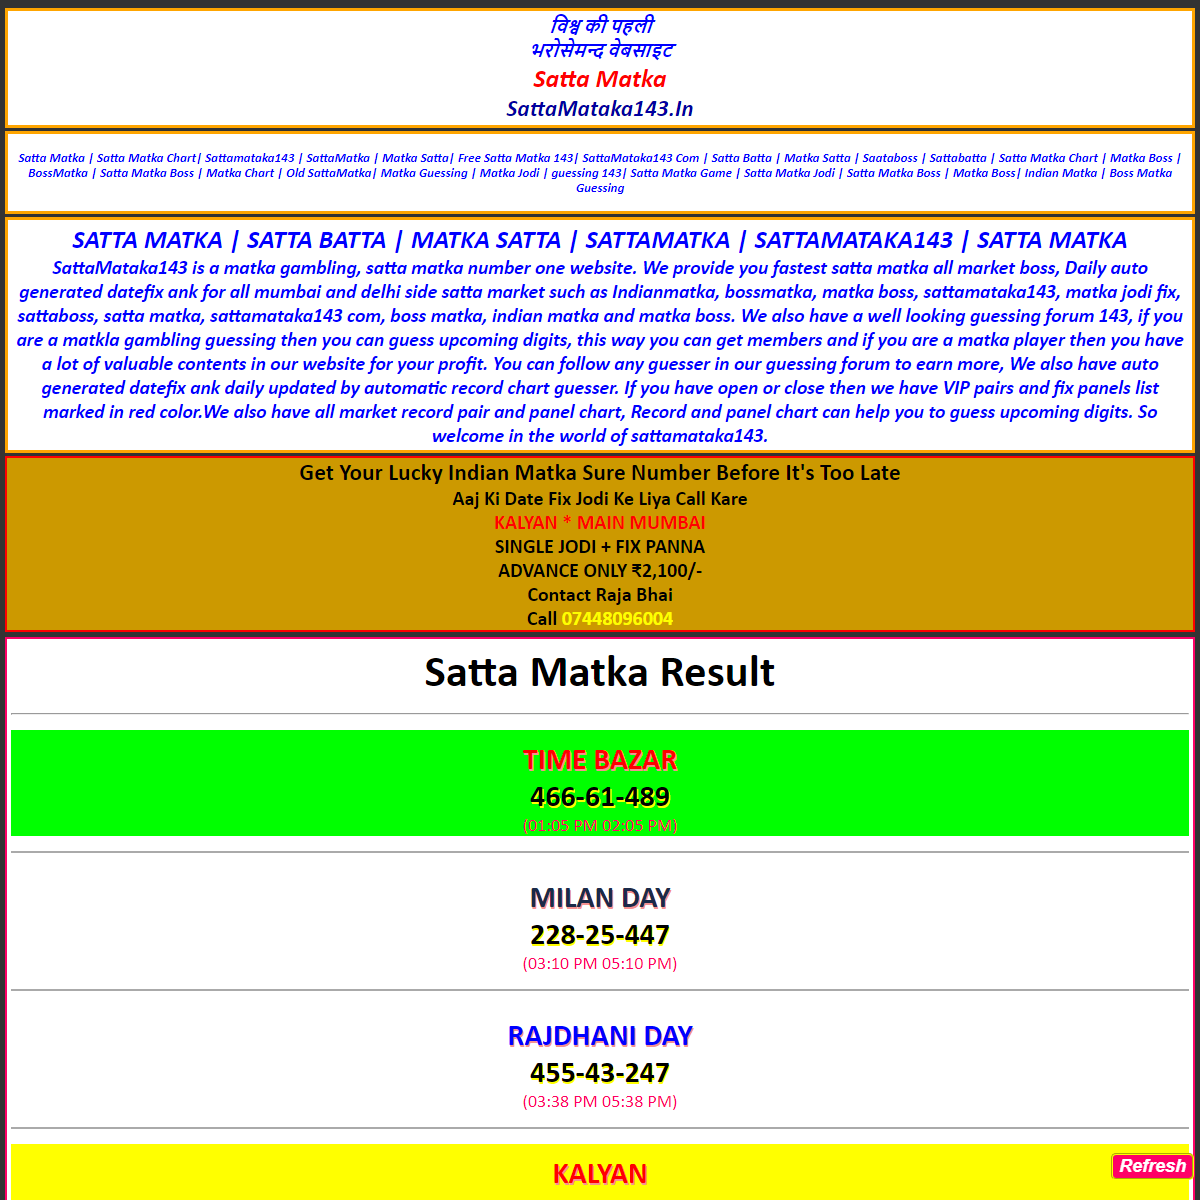 A complete backup of https://sattamataka143.in/